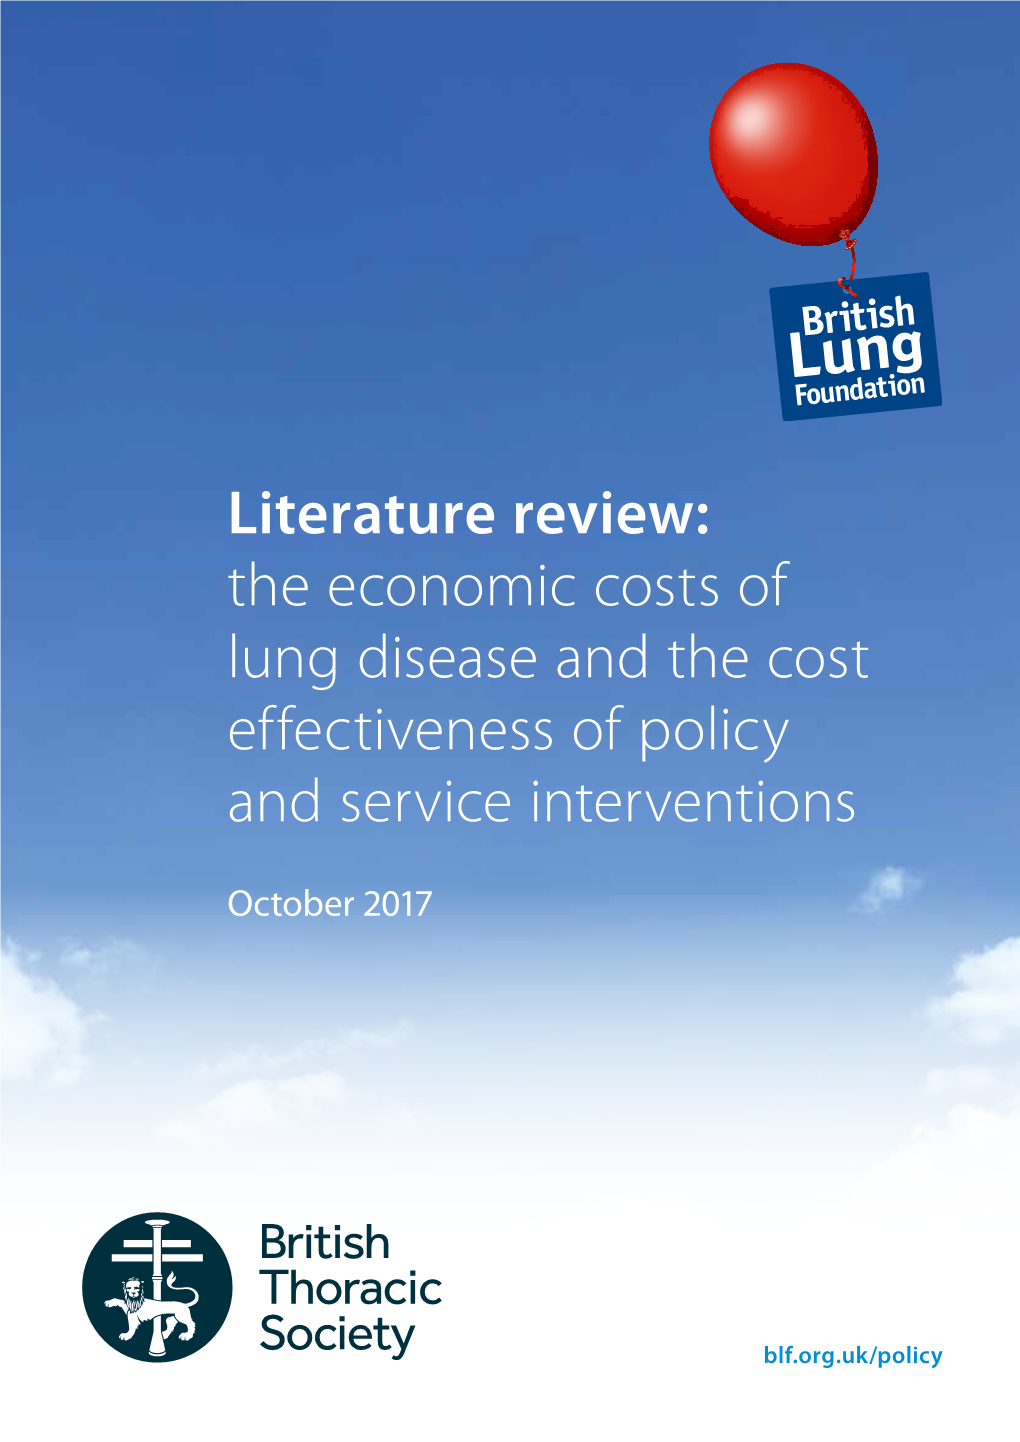 The Economic Costs of Lung Disease and the Cost Effectiveness of Policy and Service Interventions Blf.Org.Uk/Policy